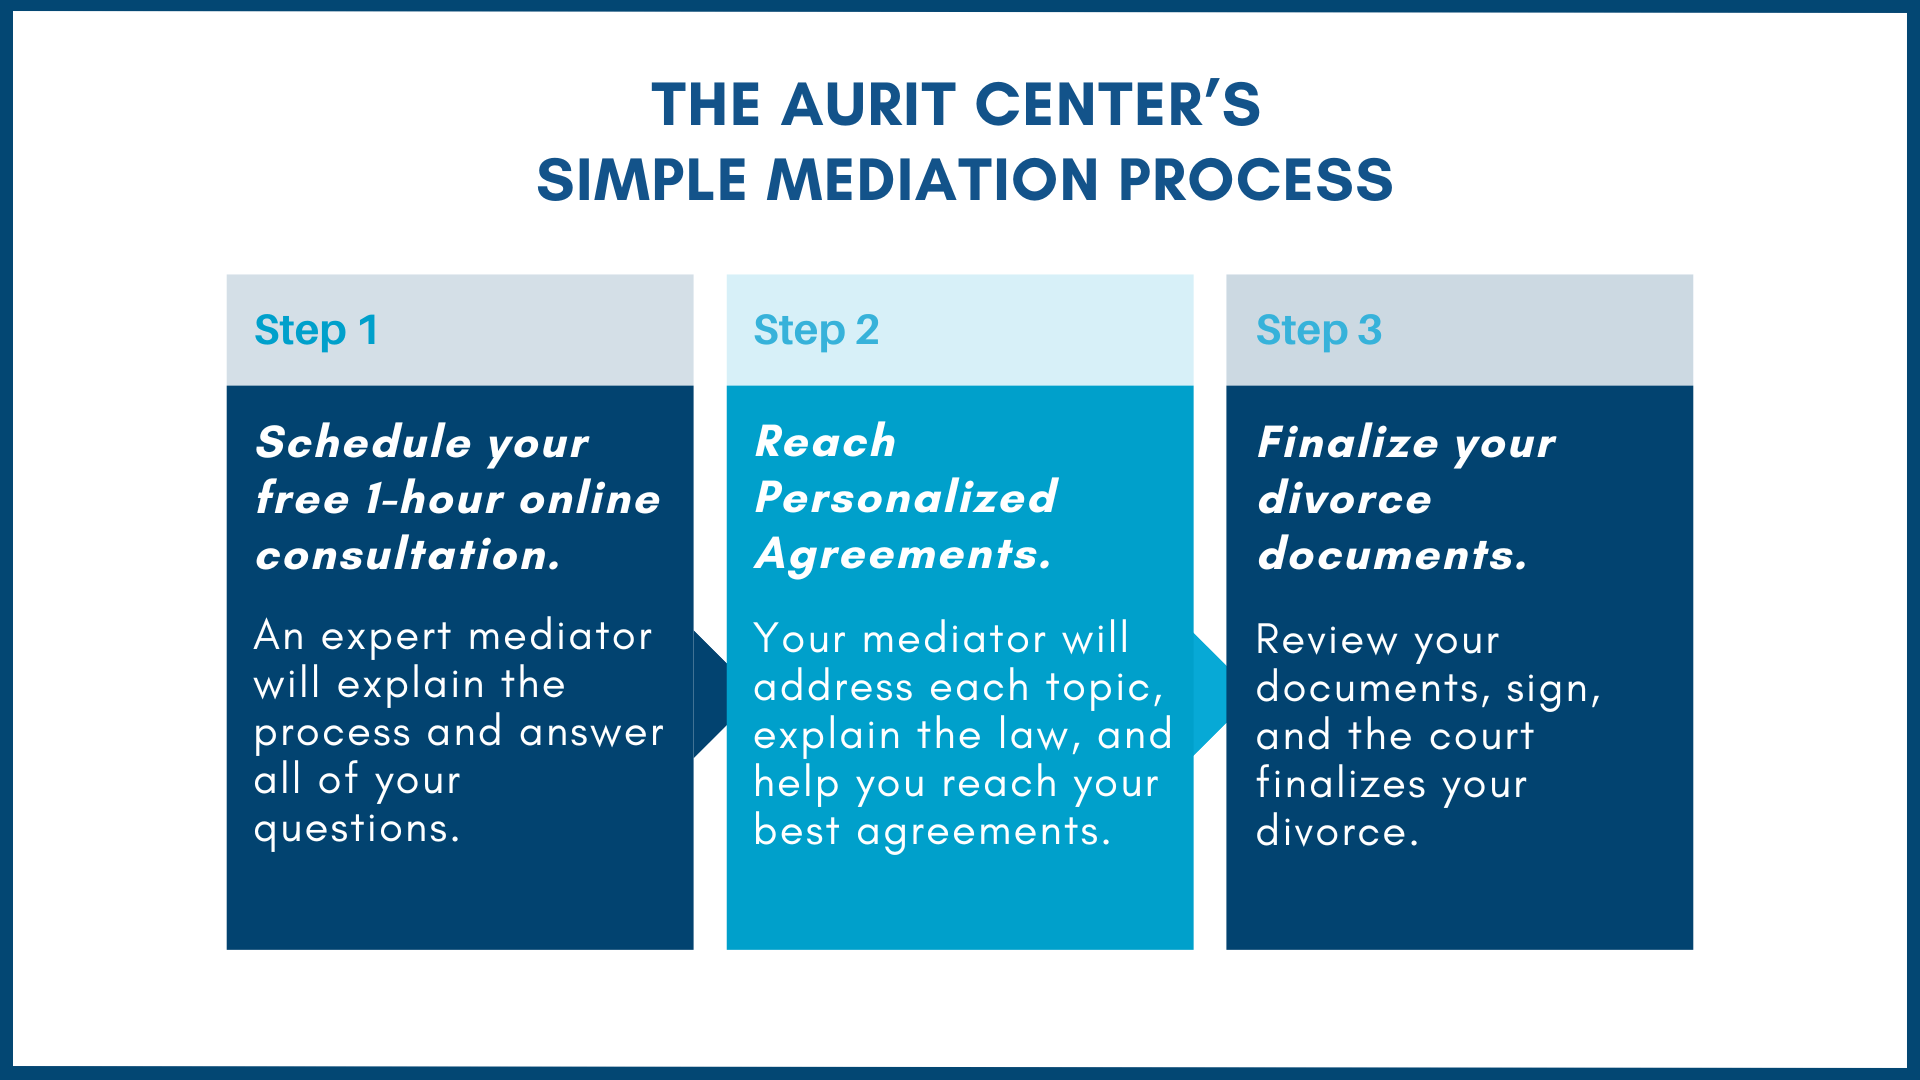 The three steps of The Aurit Center's mediation process.